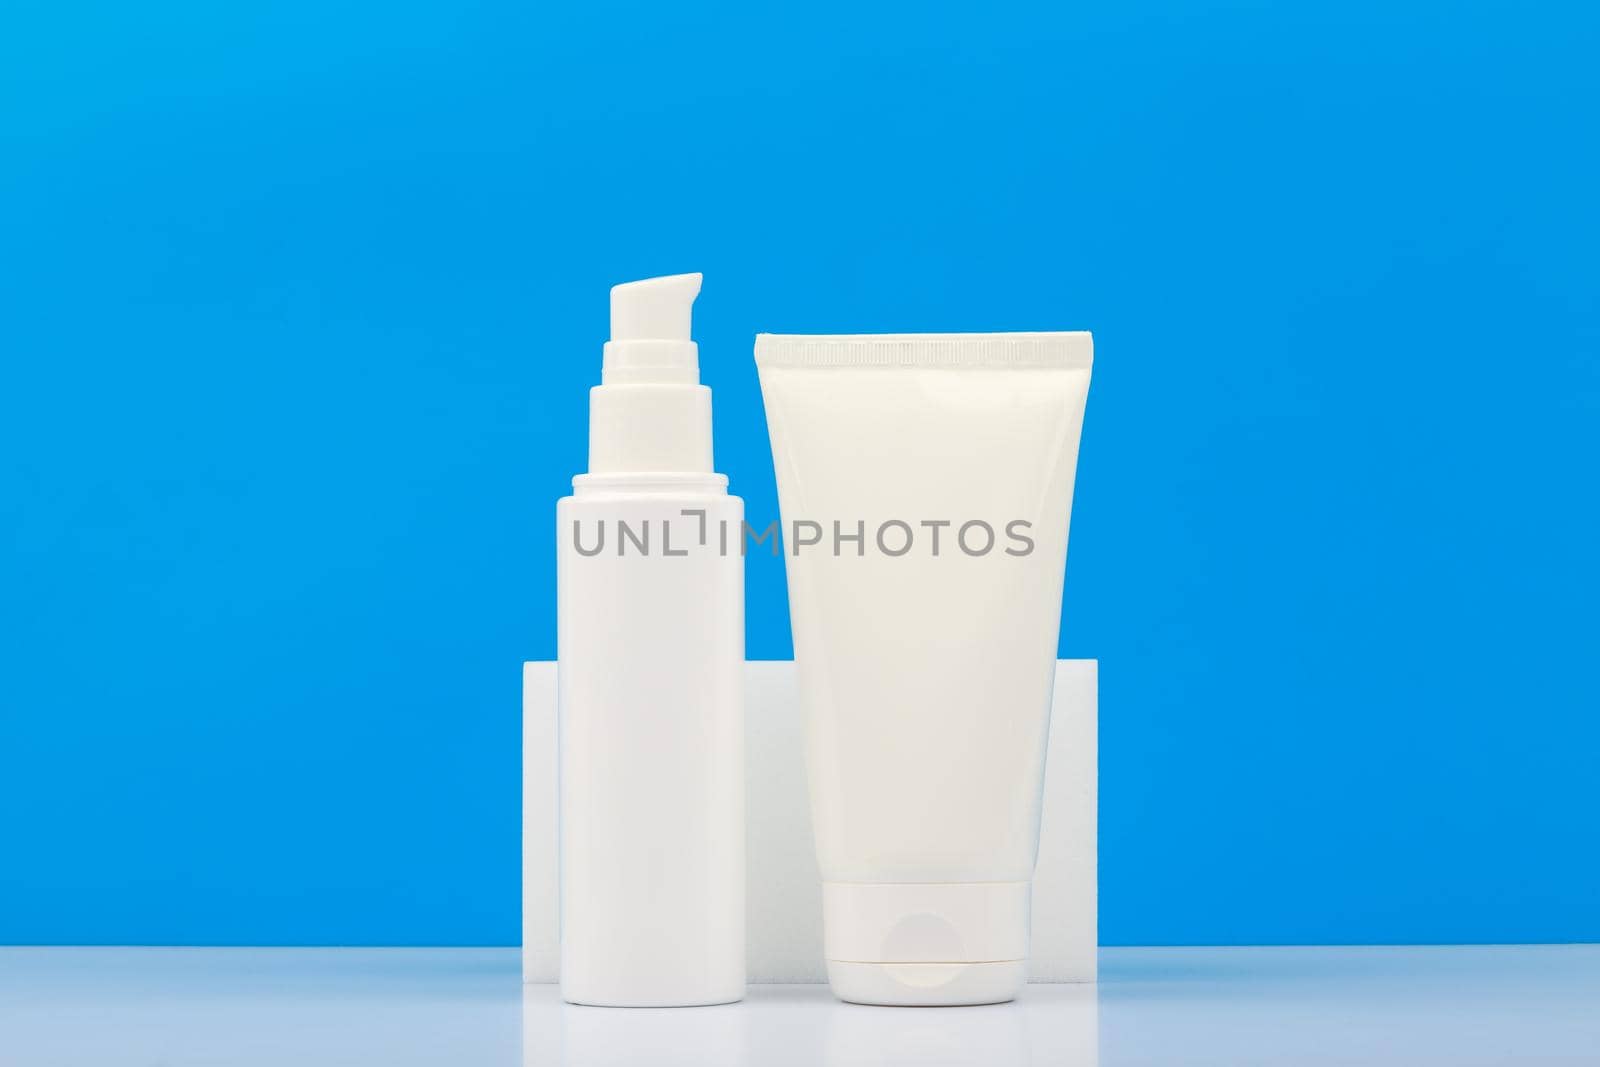 Set of two creams in white unbranded tube on white table against blue background with copy space. Concept of hygiene and hydrating and moisturizing beauty products, cream, balm or lotion